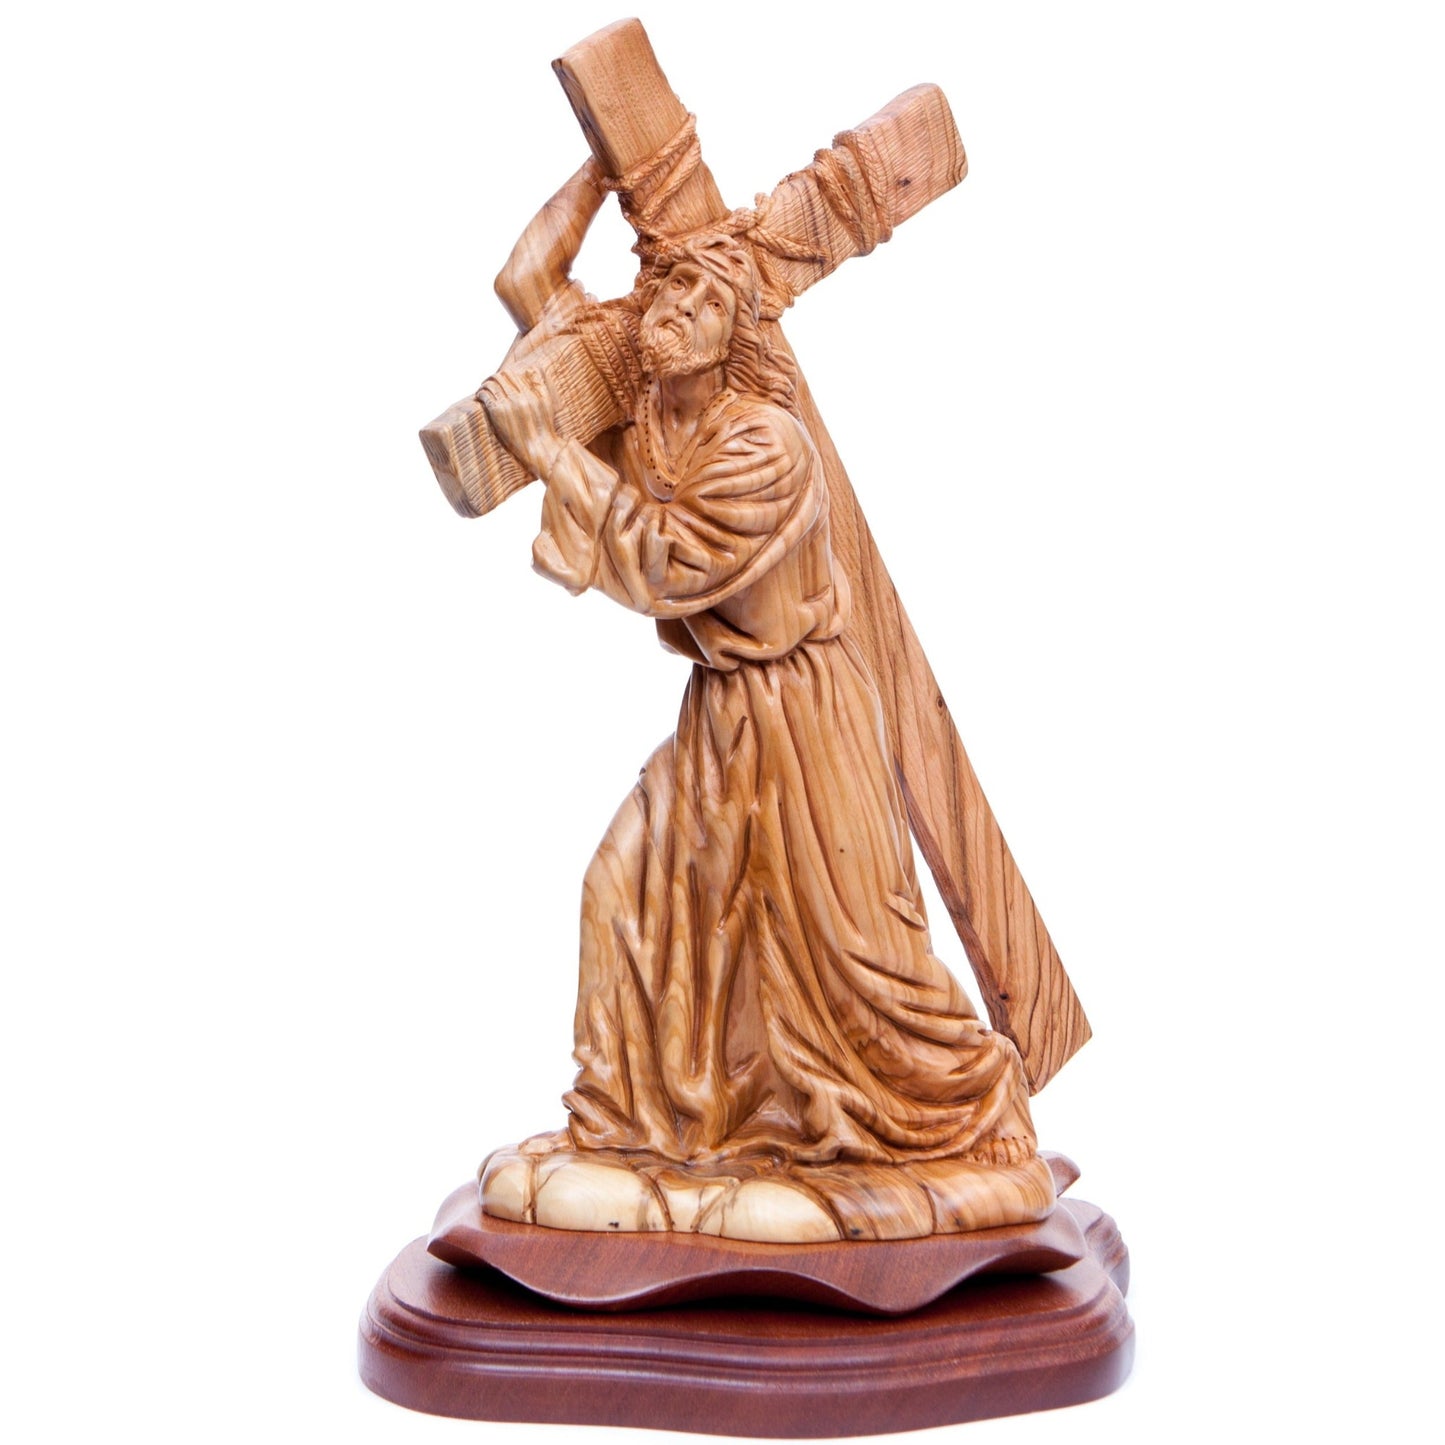 Jesus Christ Carrying Cross, 13.8" Wood Carving from Holy Land